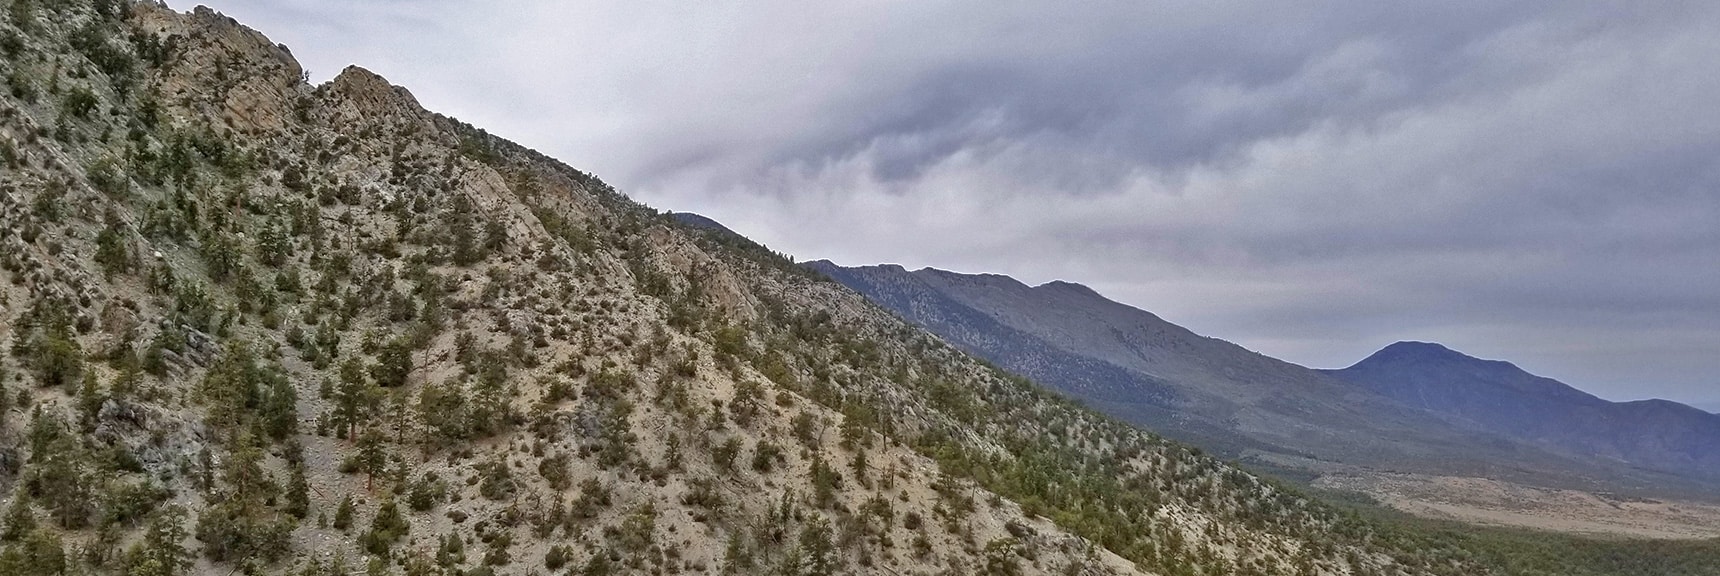 Ridge System Toward Bonanza Peak and Cold Springs Viewed from 9,235ft High Point Bluff | Sawmill Trail to McFarland Peak | Spring Mountains, Nevada